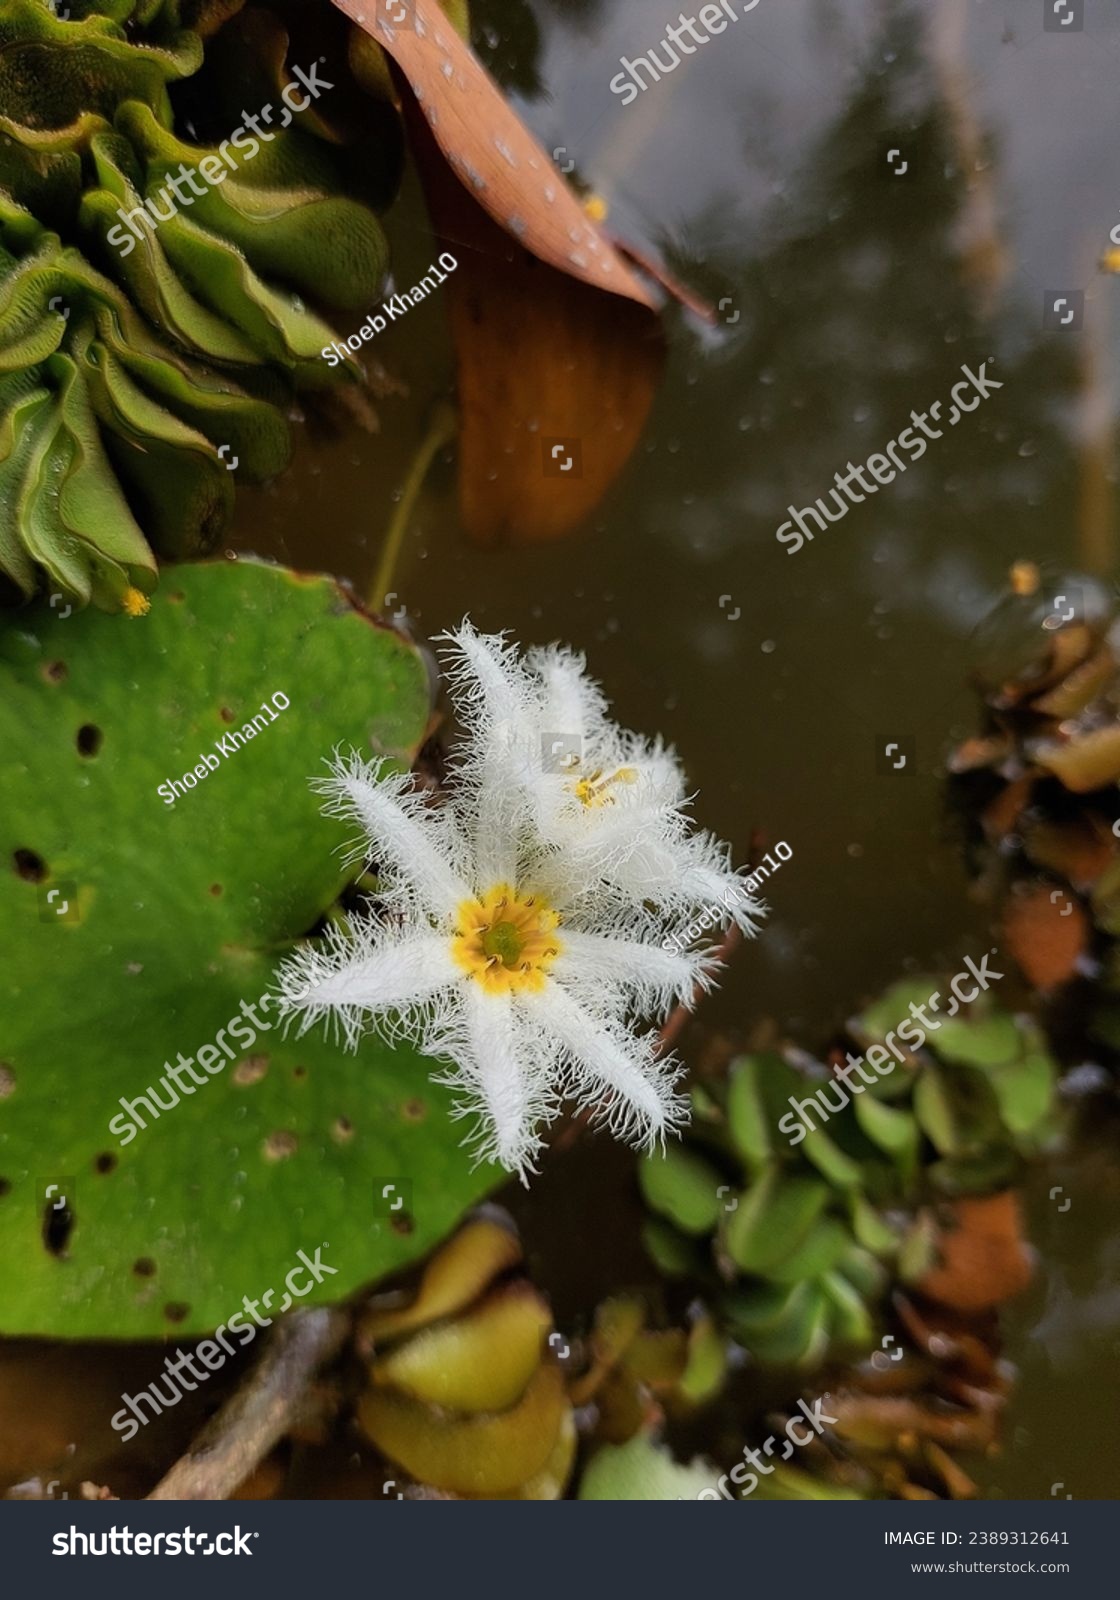 Nymphoides indica.
Nymphoides indica is an aquatic plant in the Menyanthaceae, native to tropical areas around the world. #2389312641